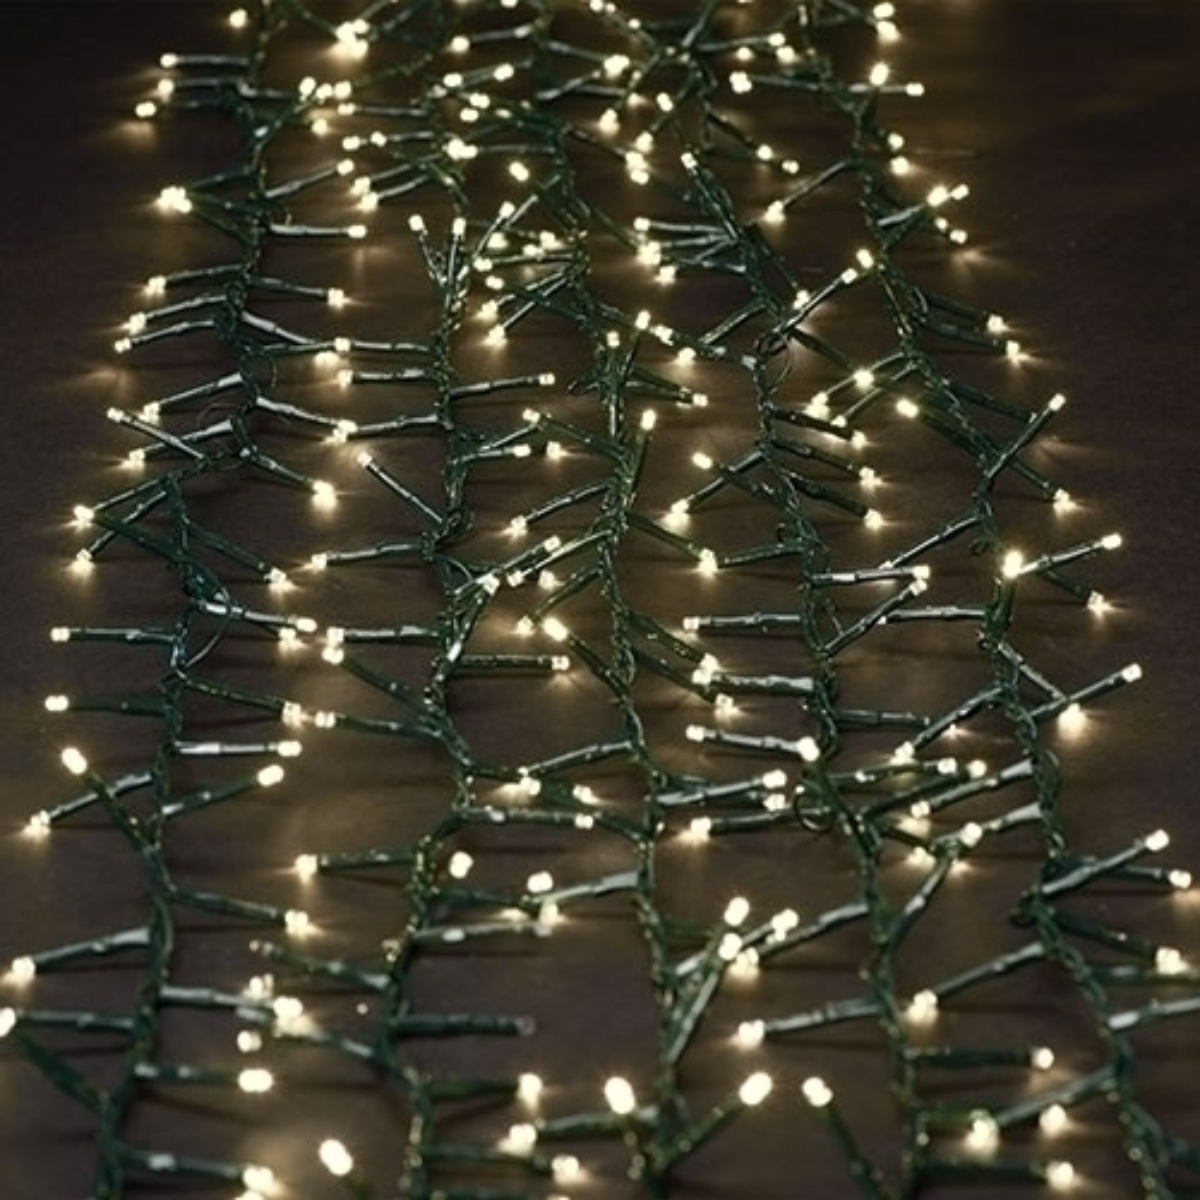 Roman Warm White LED Christmas Lights with Green Cord 9.25" - image 1 of 1